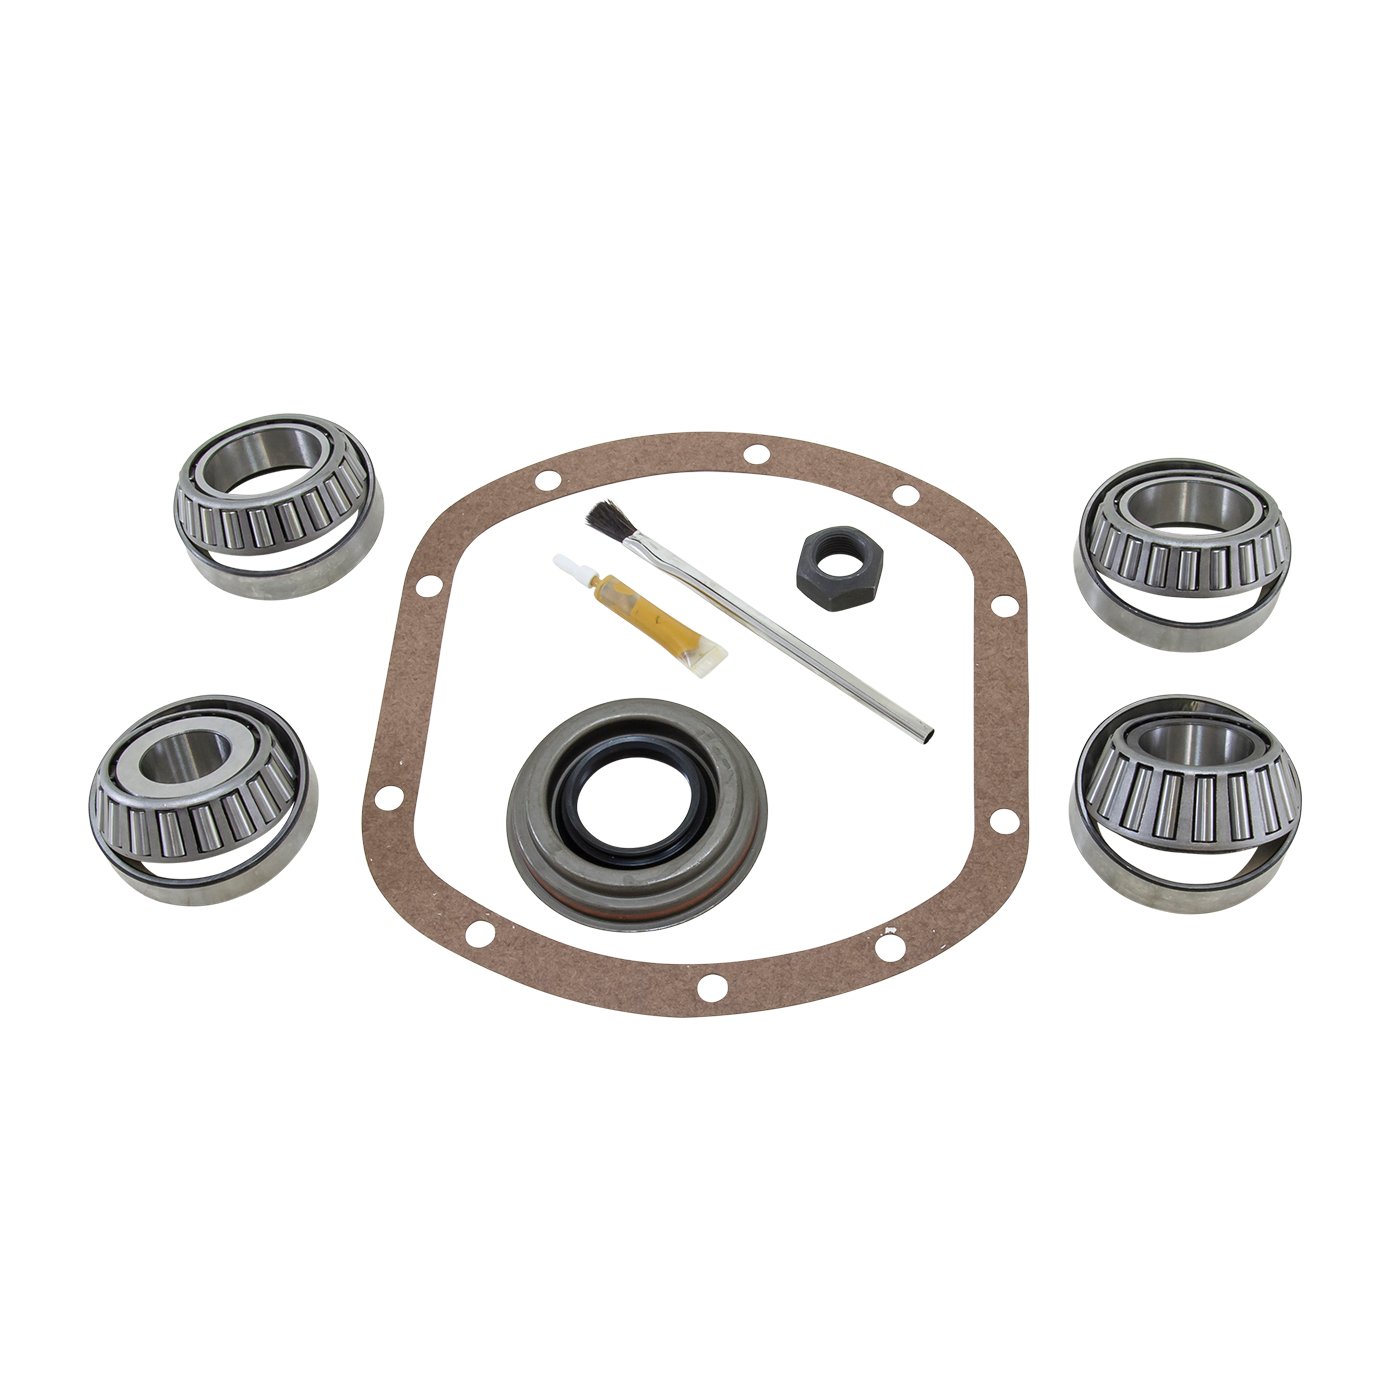 Bearing Install Kit For Dana 30 Front Differential, Without Crush Sleeve.